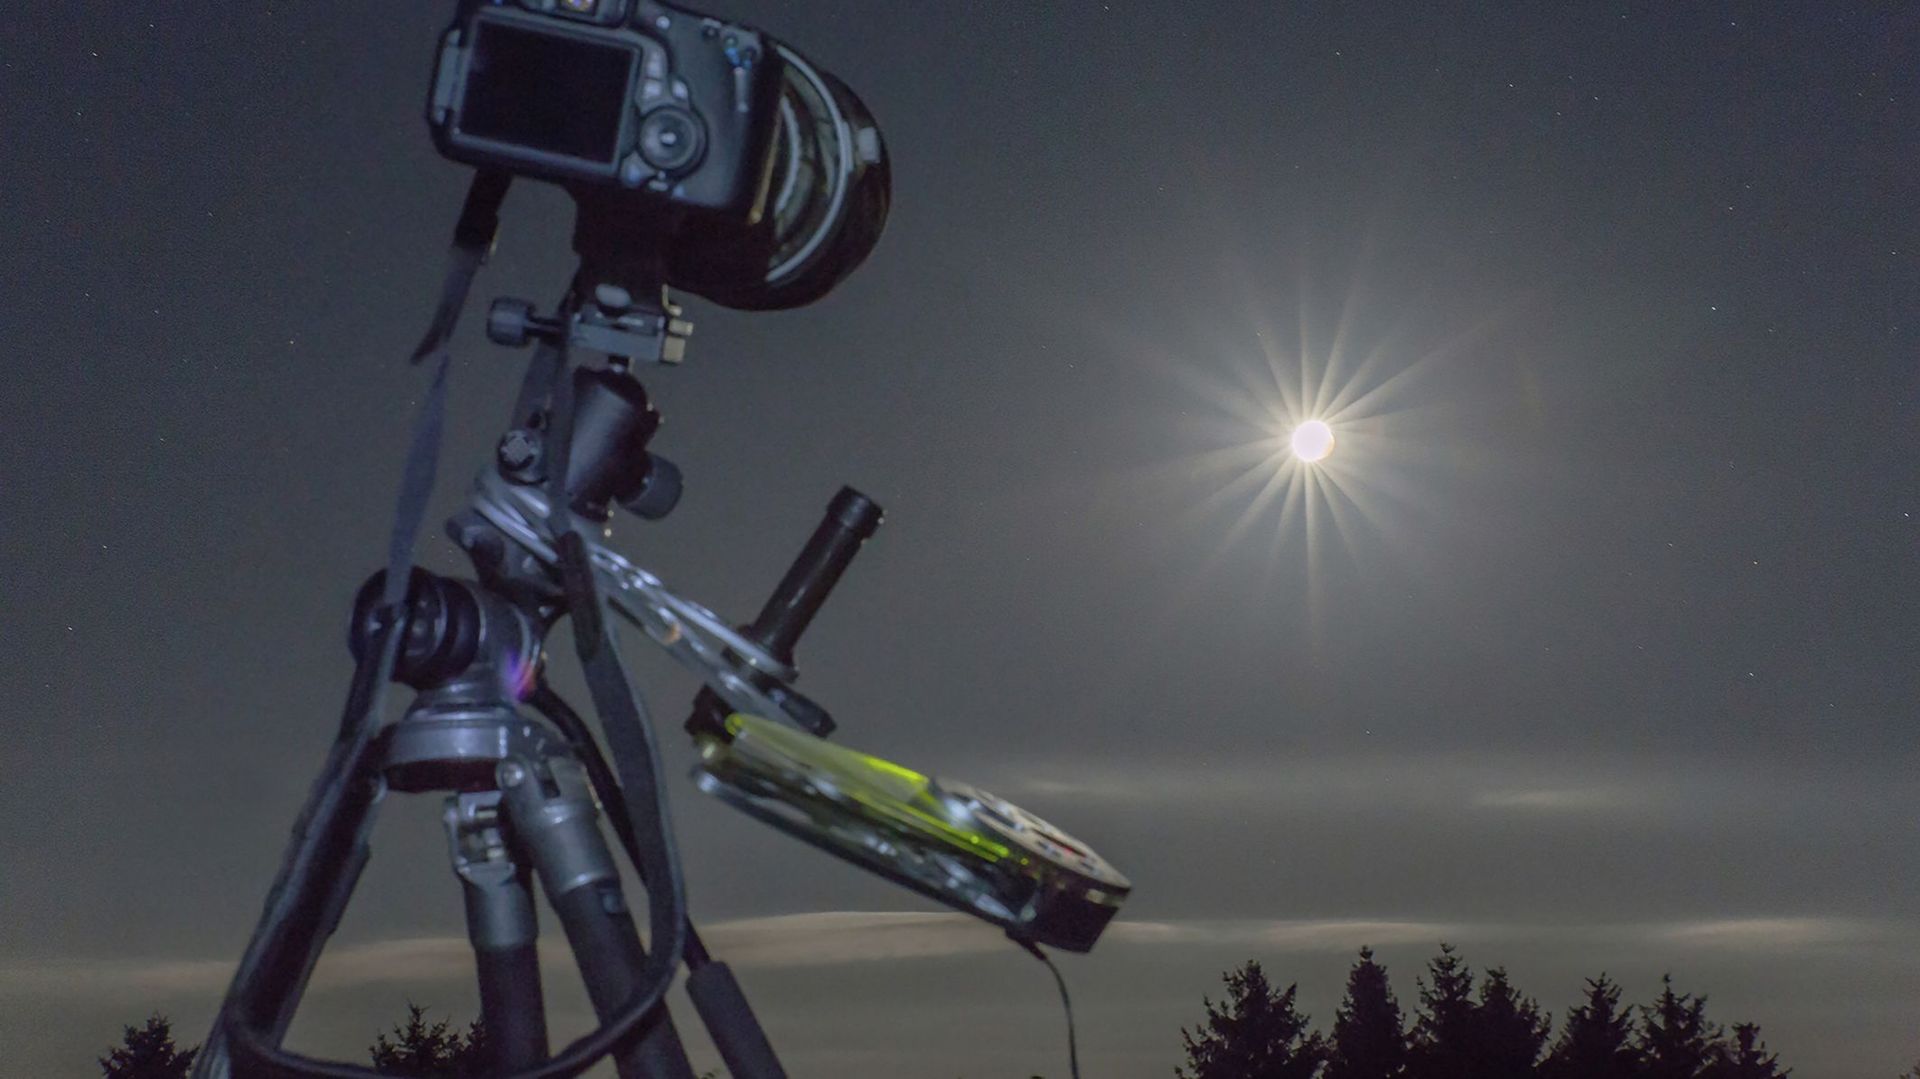 Germany, Hesse, Hochtaunuskreis, Equipment used for astro photography, photographing a full moon eclipse